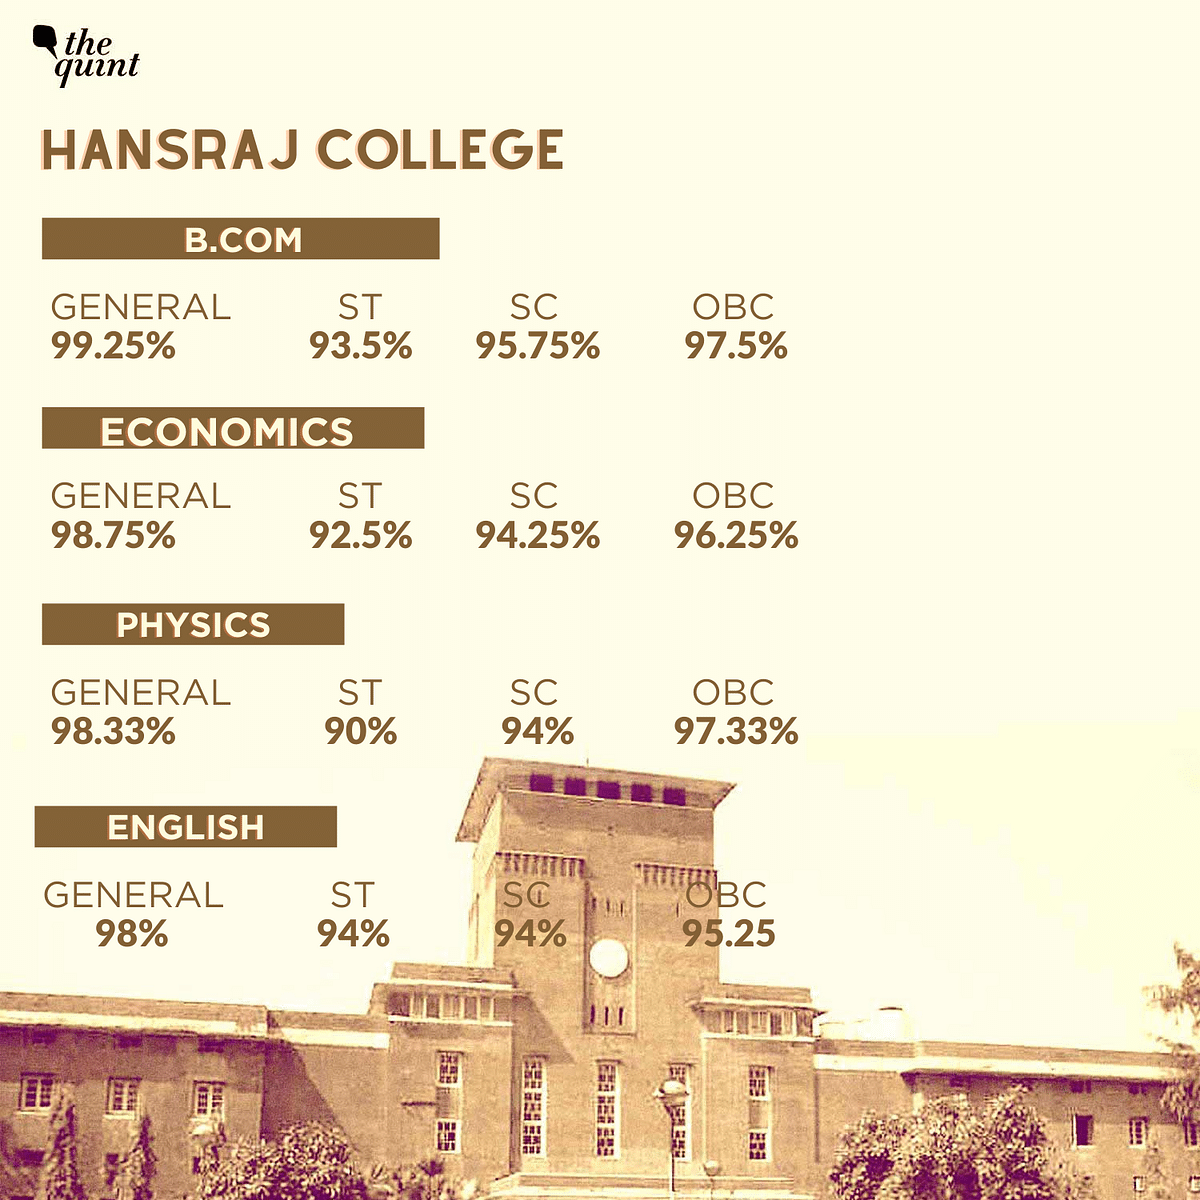 Around 3,53,918 students have registered for admissions to undergraduate courses in DU this year.